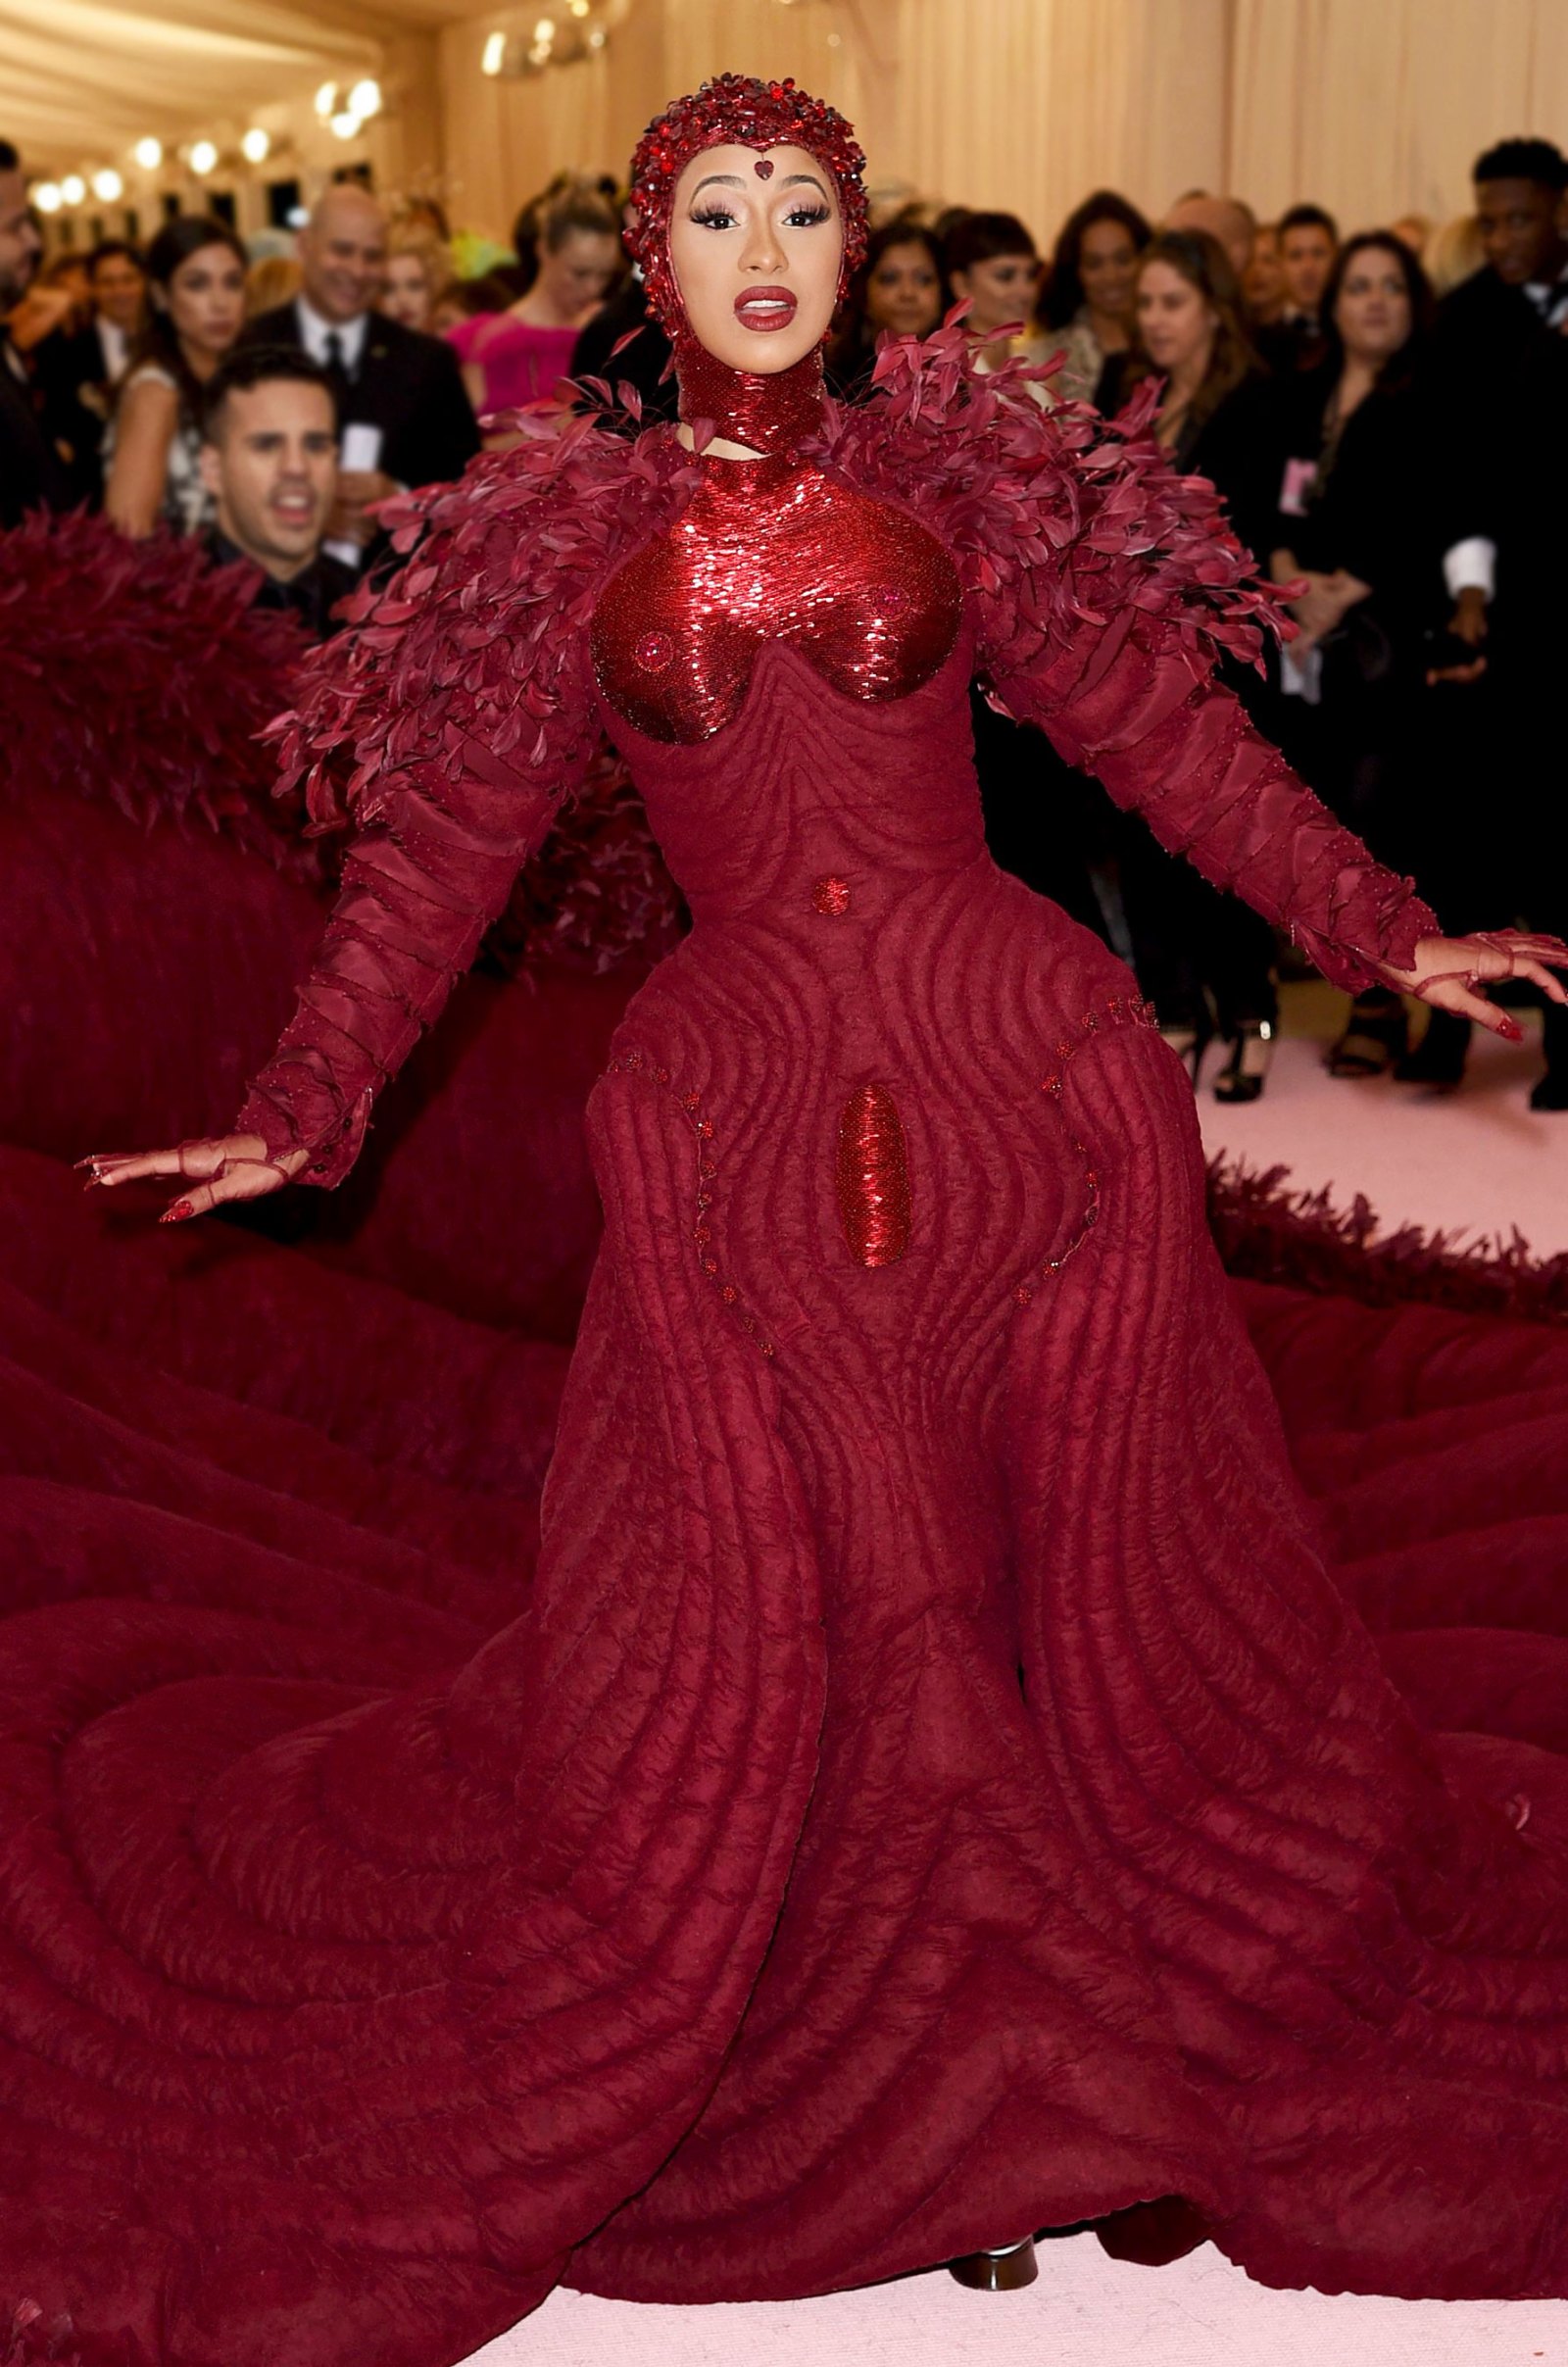 Relive the Wildest Met Gala Looks of All Time